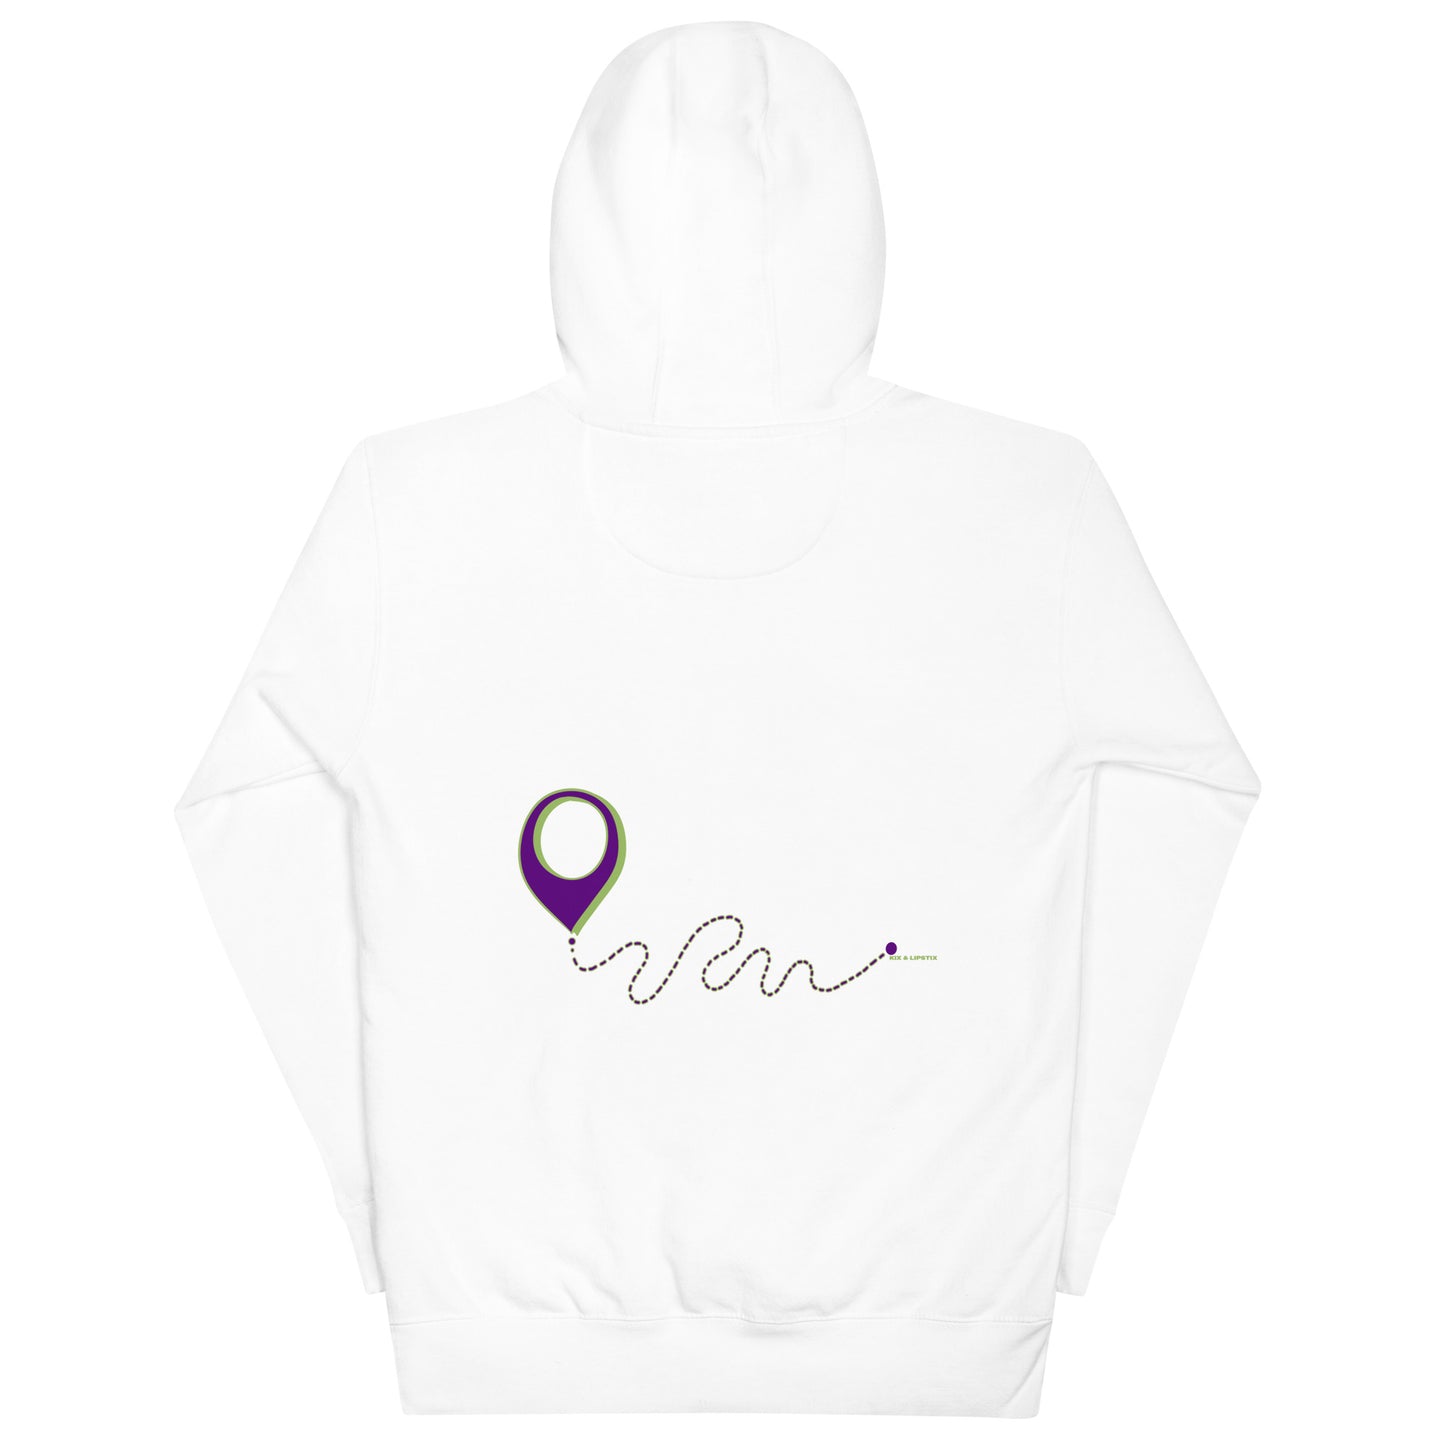 Unisex "Great Sneakers Take You Great Places" Hoodie